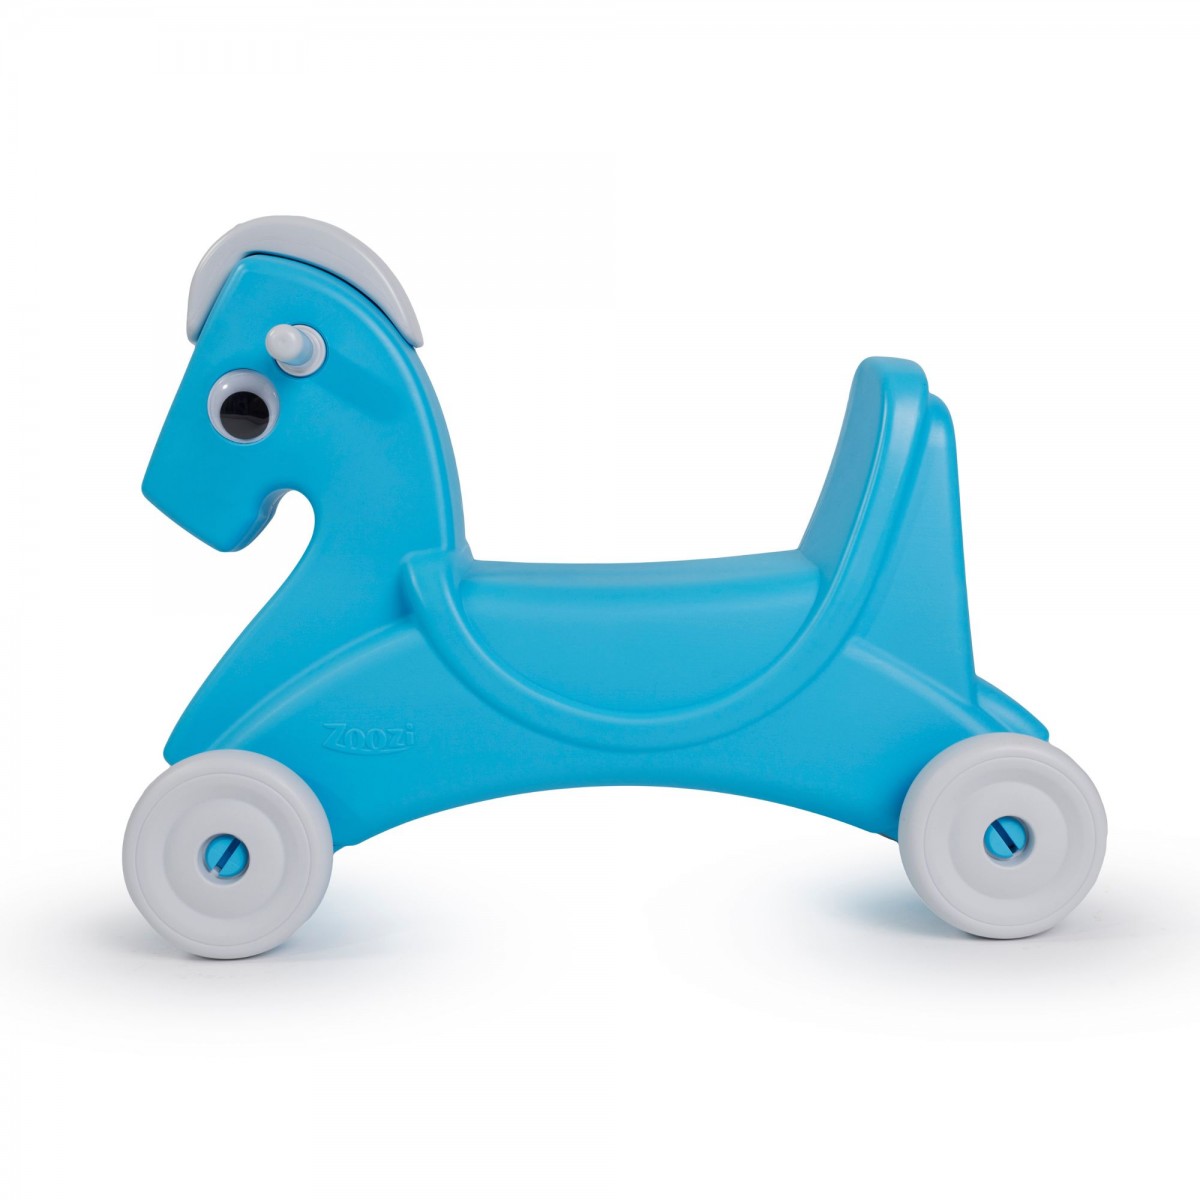 Zoozi  2 in 1 Ride On Rocking Horse for Toddlers and Babies, Comes with Wheels, Blue, 12M+